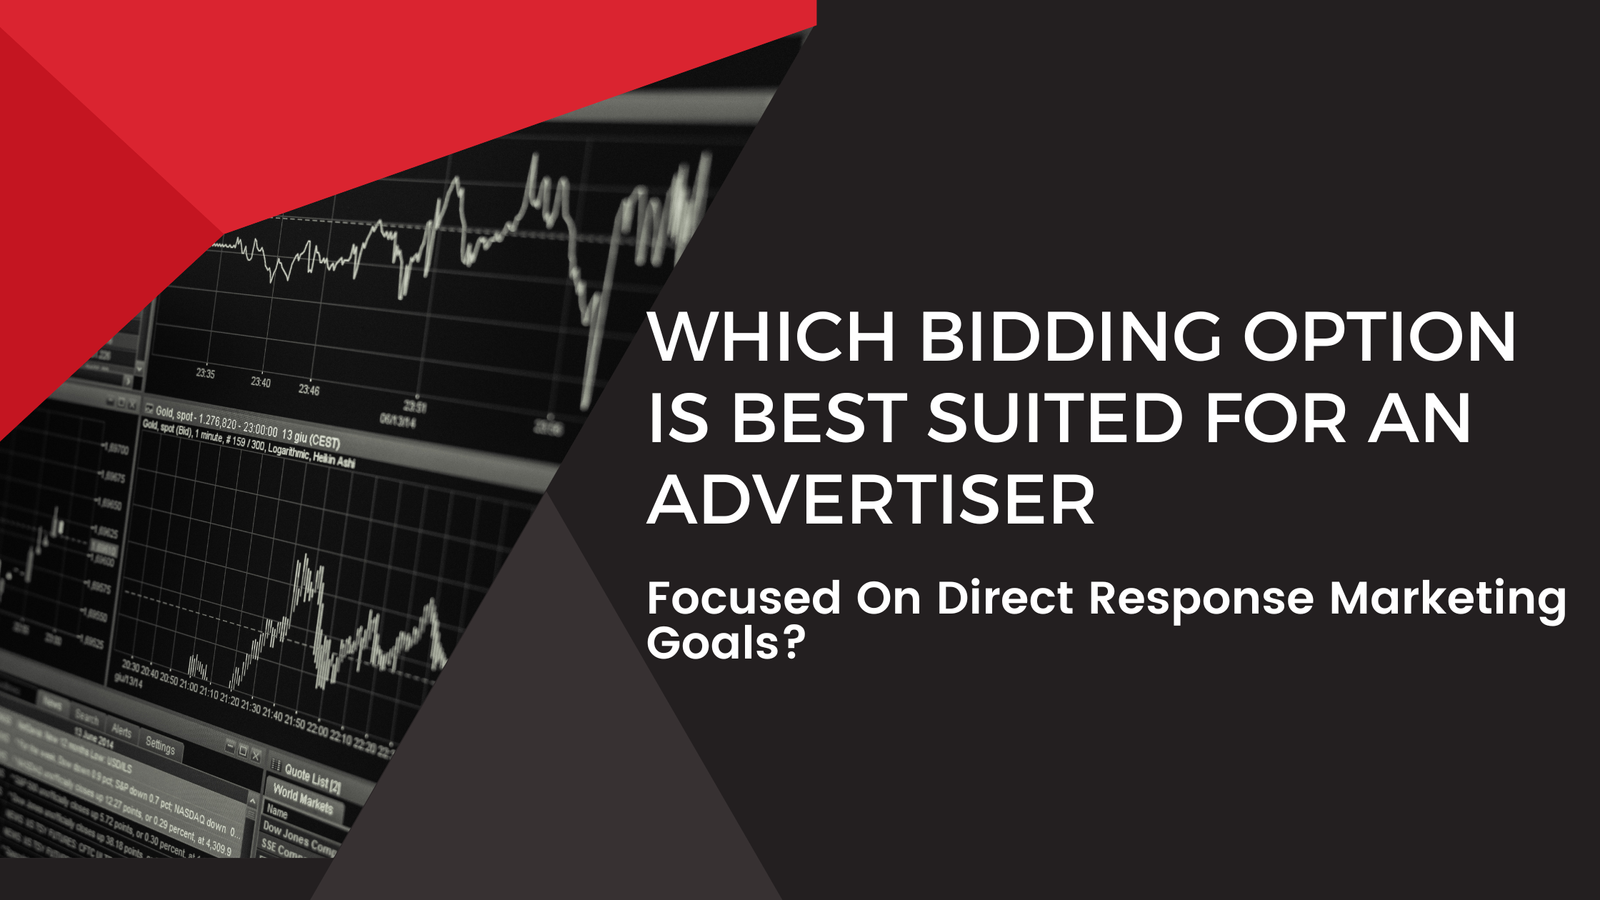 Which Bidding Option Is Best Suited For An Advertiser Focused On Direct Response Marketing Goals